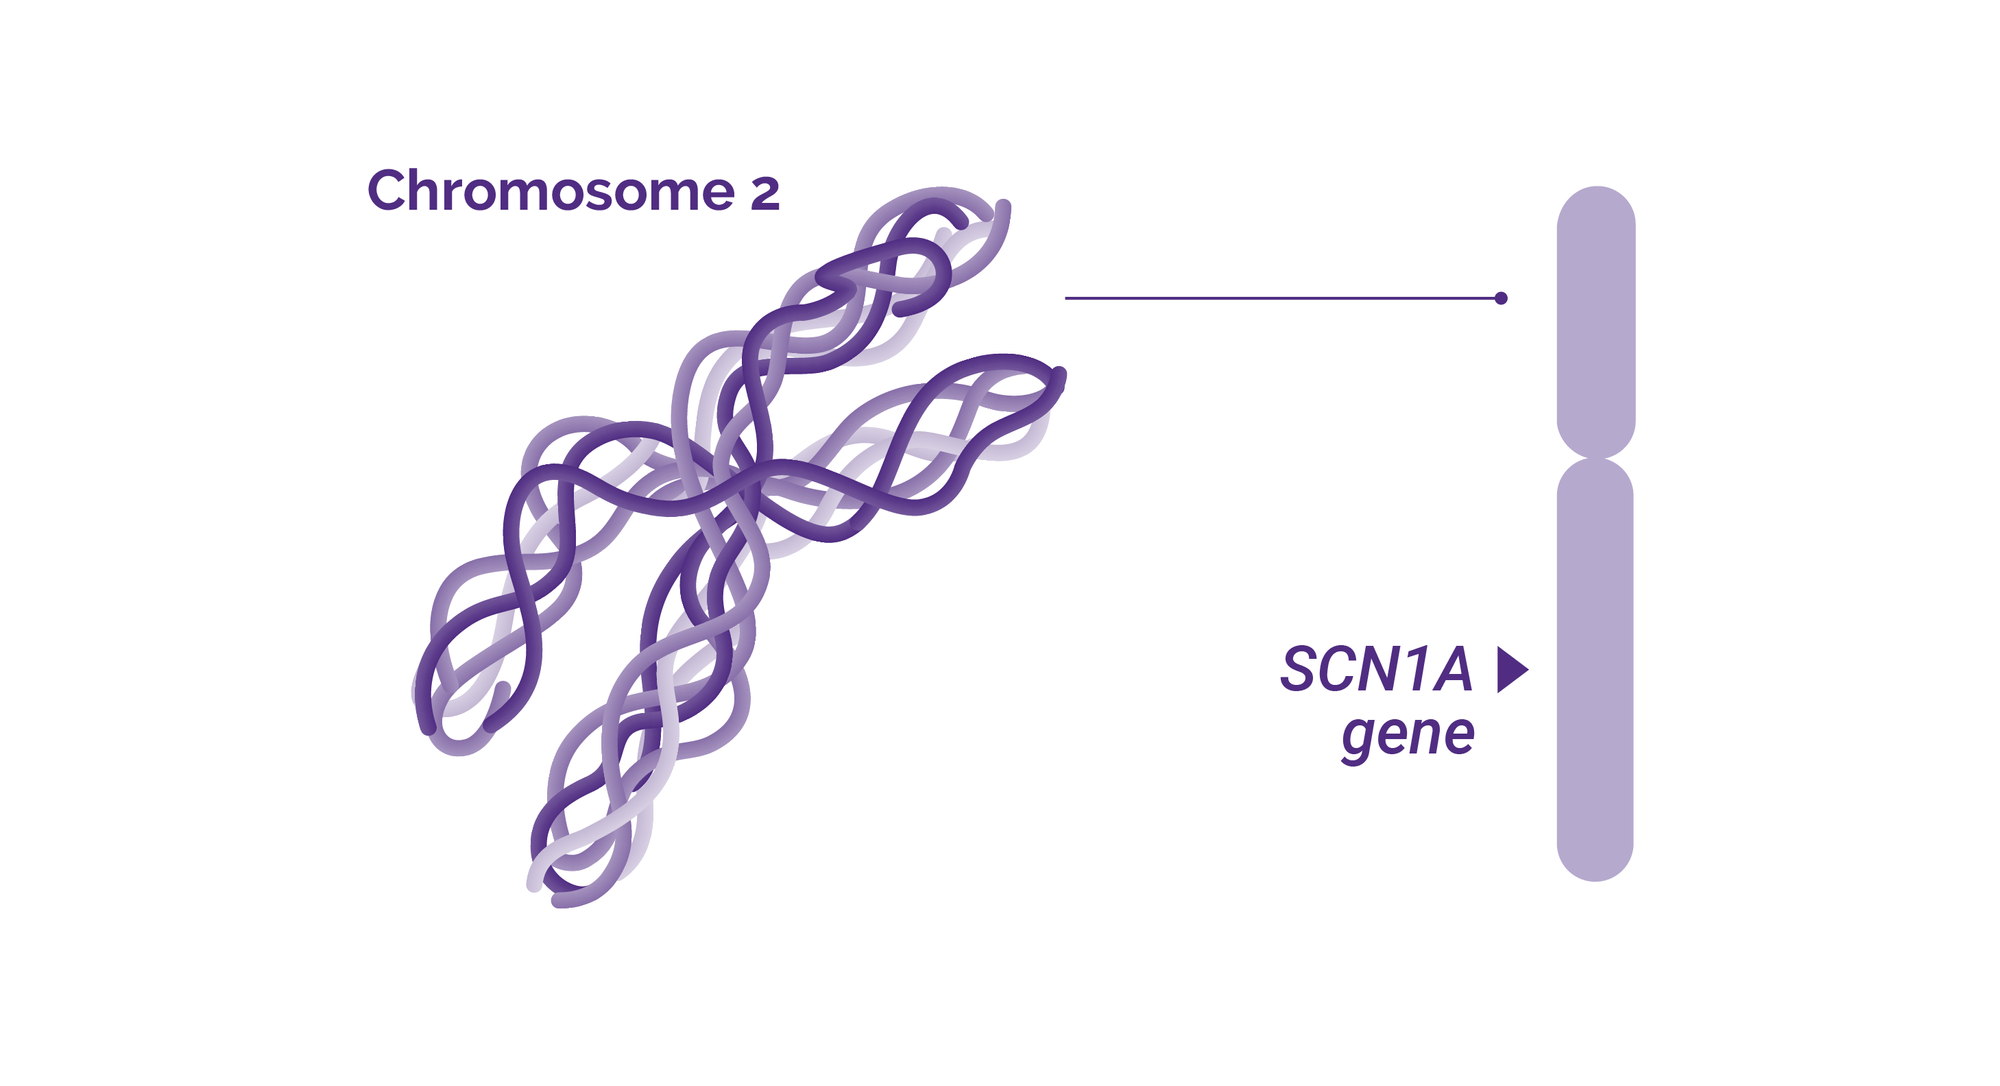 Chromosome 7 and the location of Dravet syndrome related SCN1A gene.